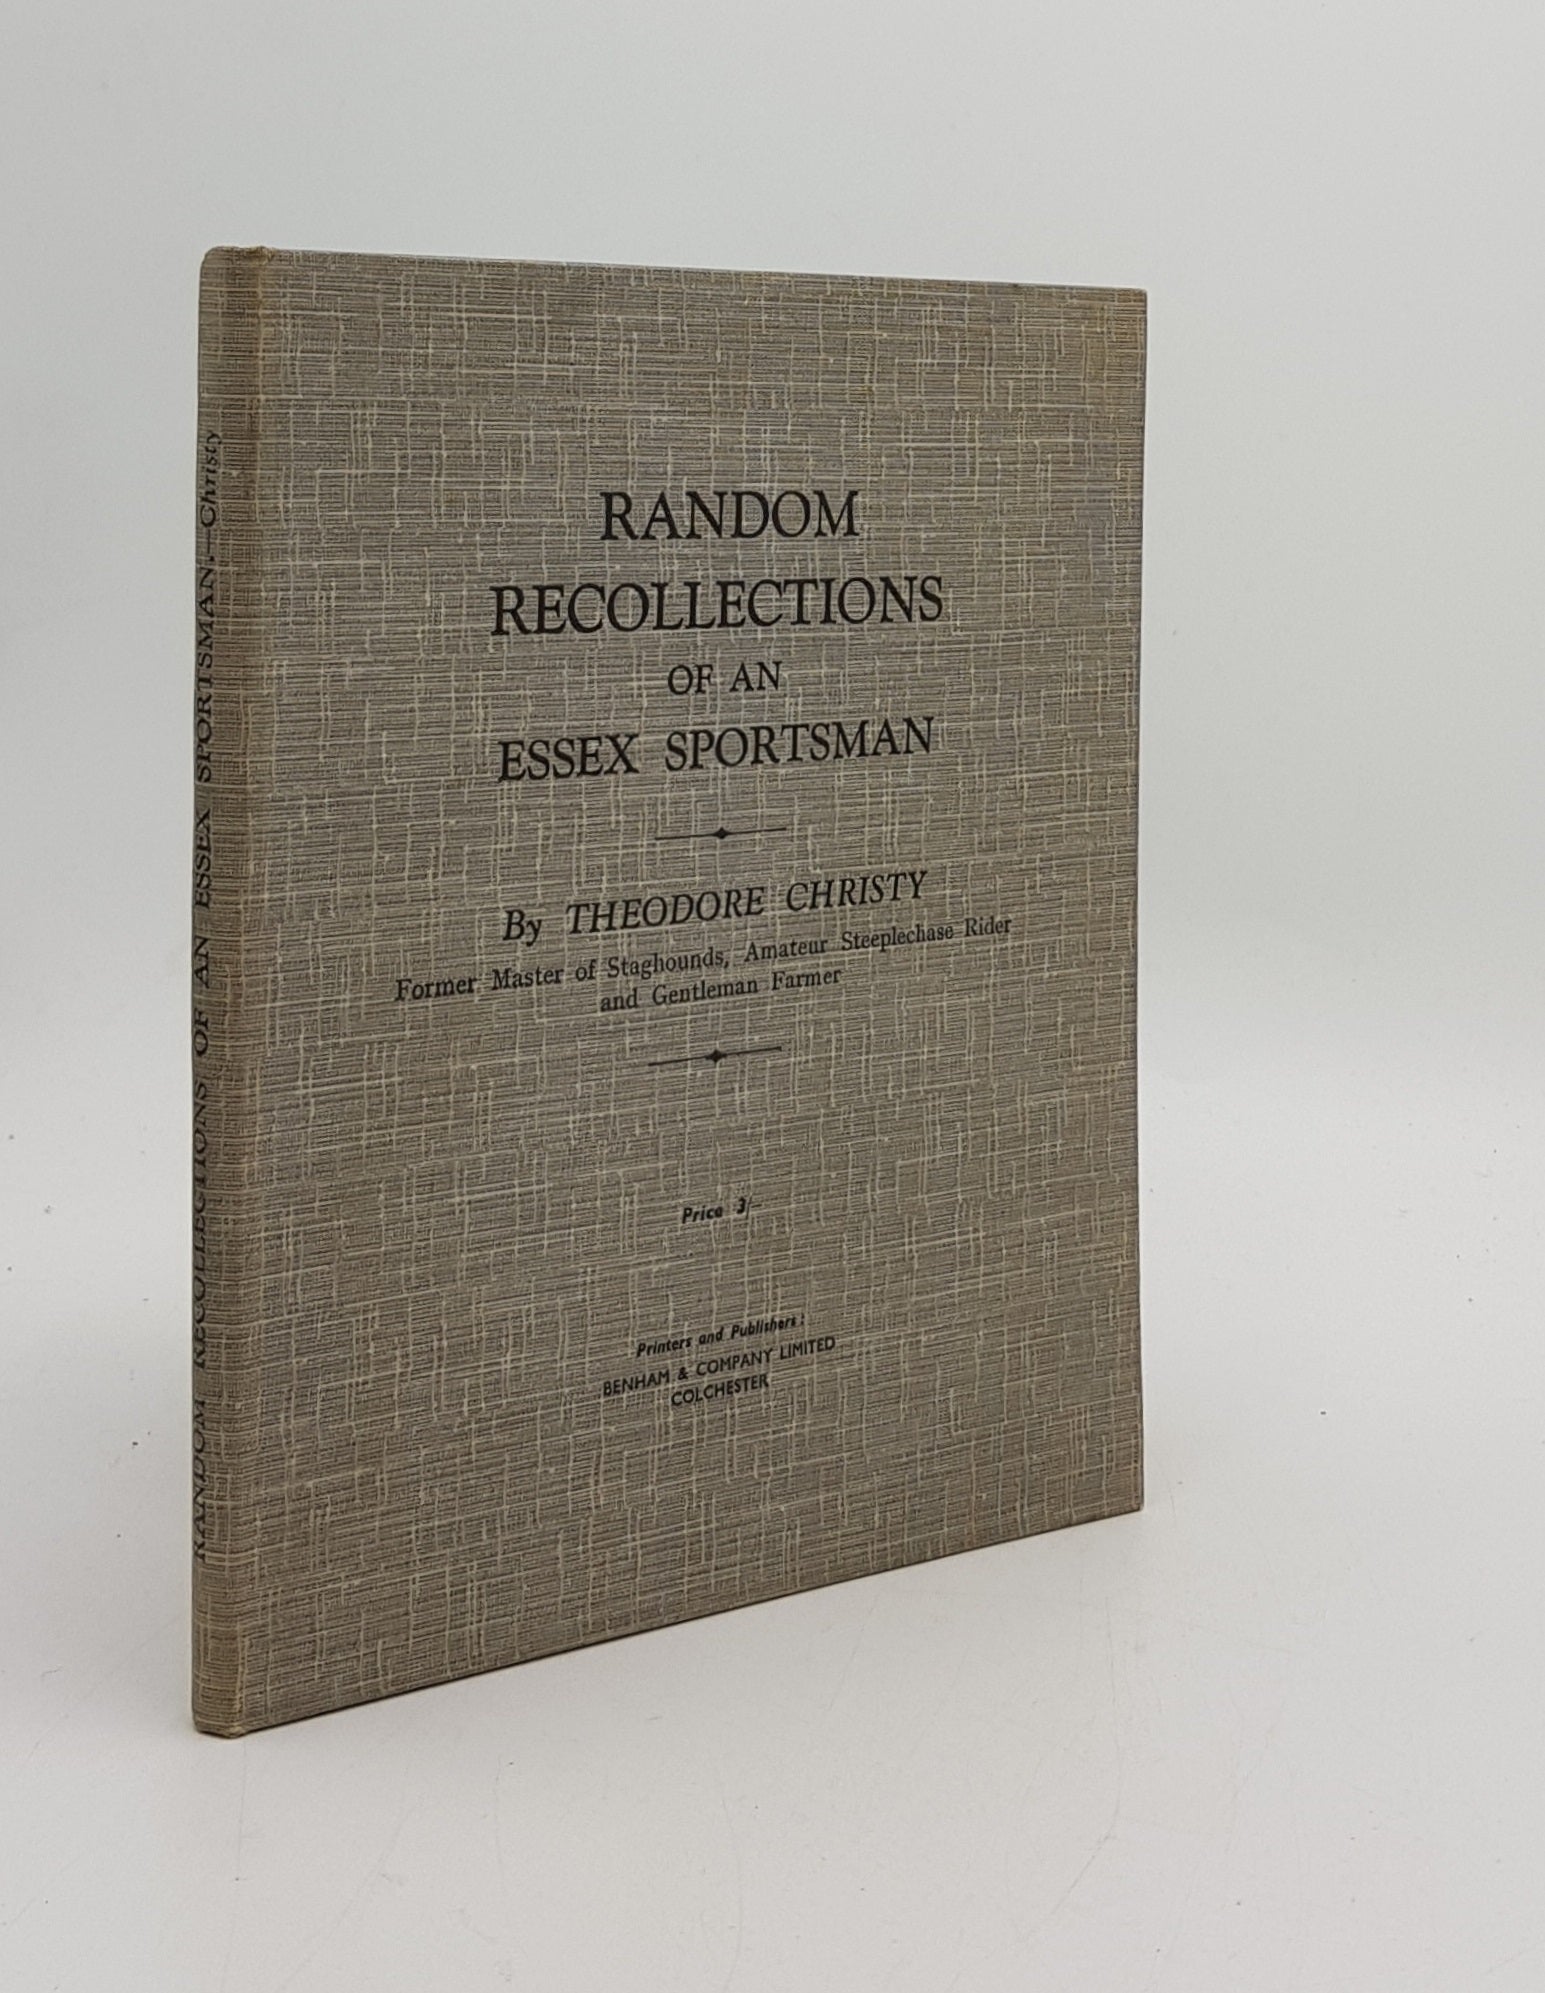 CHRISTY Theodore - Random Recollections of an Essex Sportsman